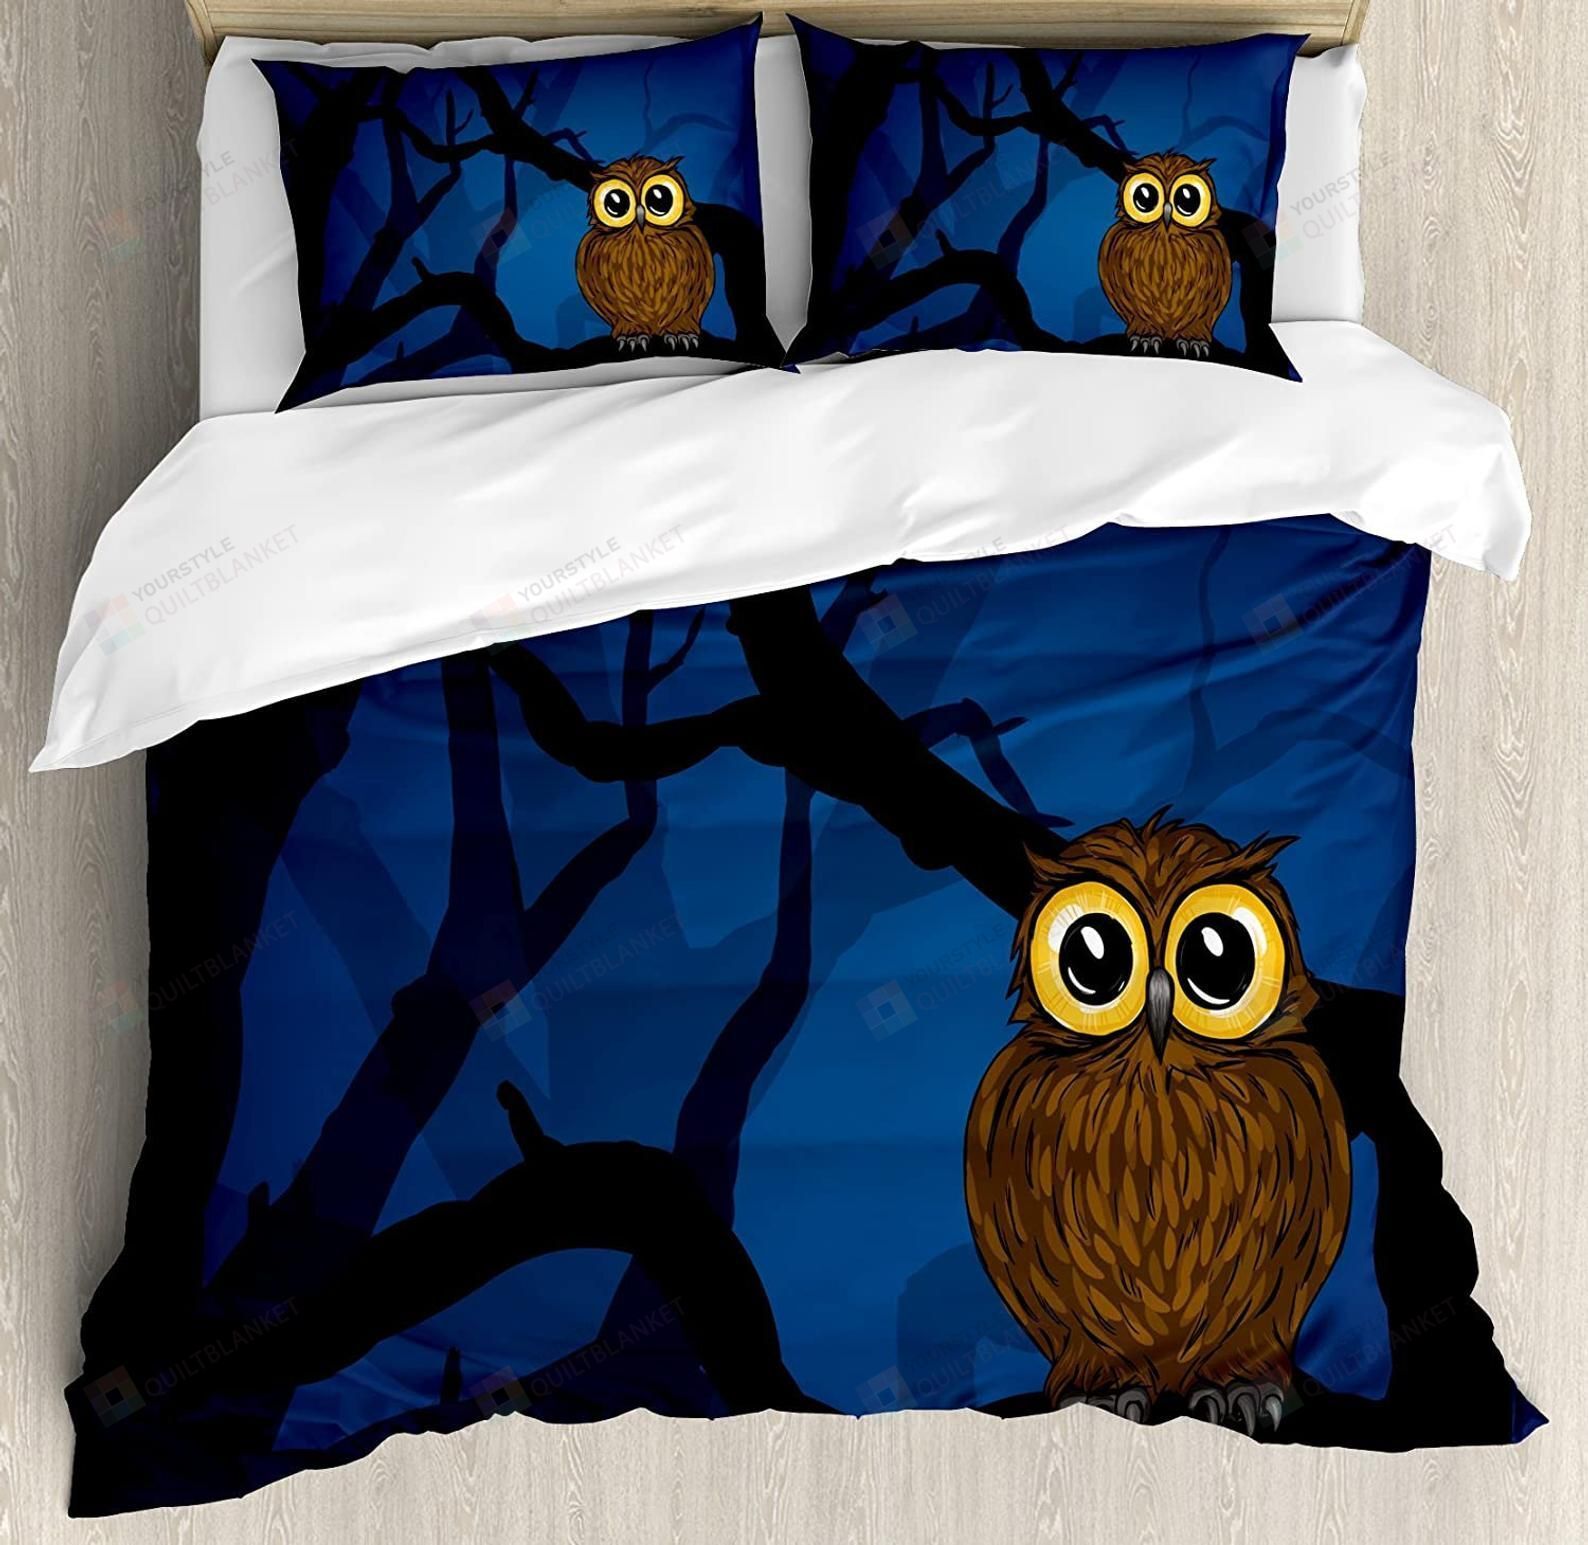 Owl Sitting On A Tree Bedding Set Cotton Bed Sheets Spread Comforter Duvet Cover Bedding Sets